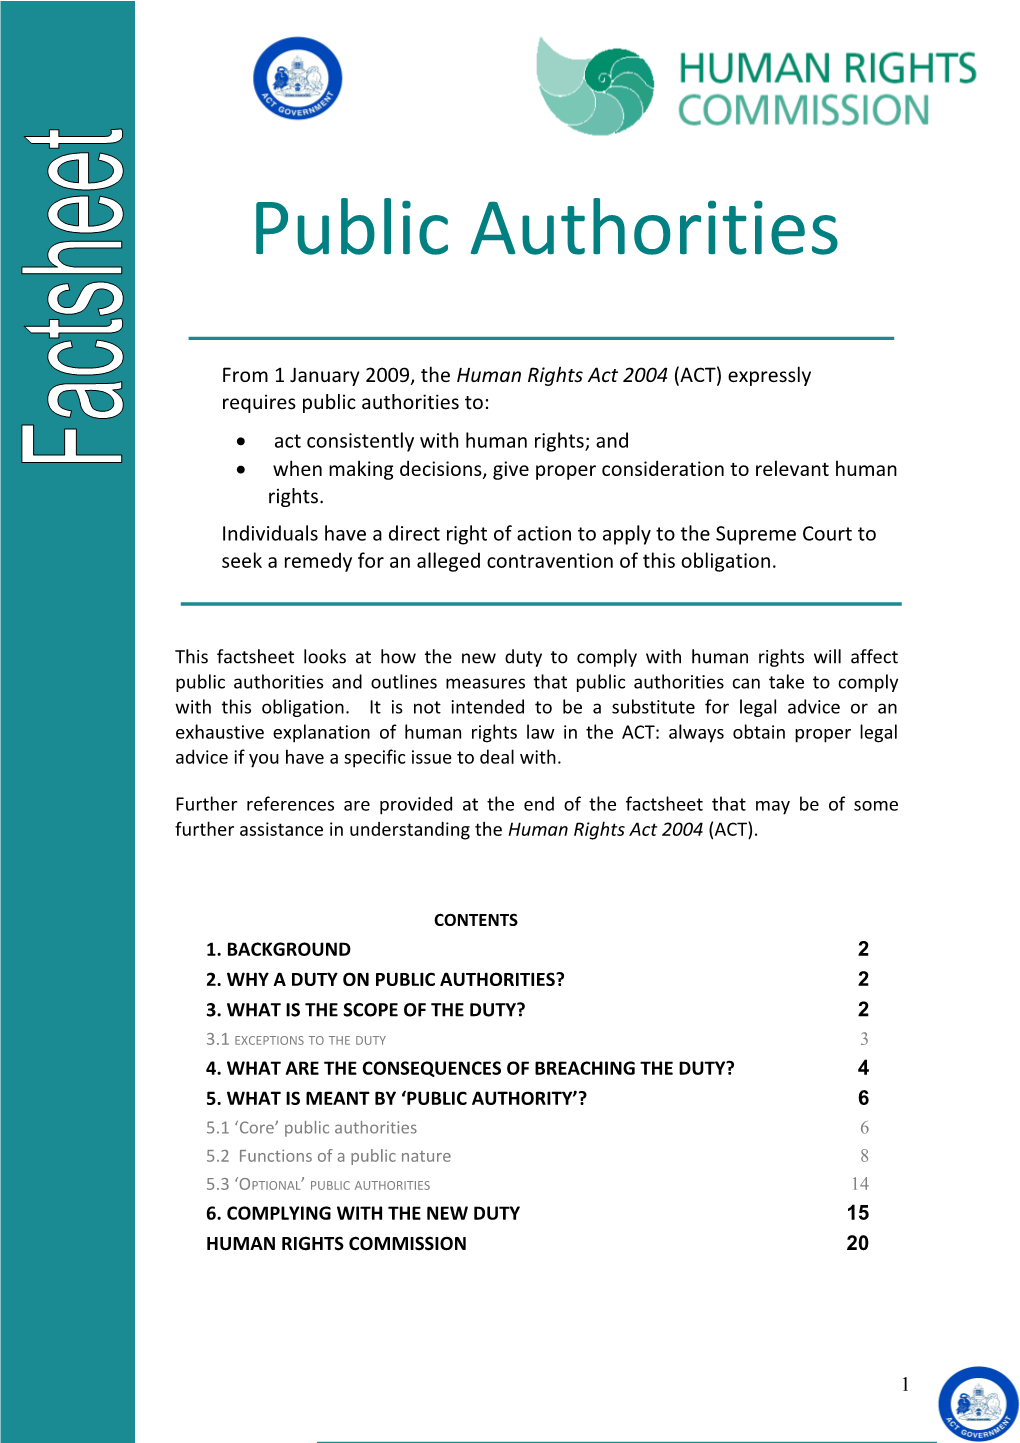 From 1 January 2009, the Human Rights Act 2004 (ACT) Expressly Requires Public Authorities To